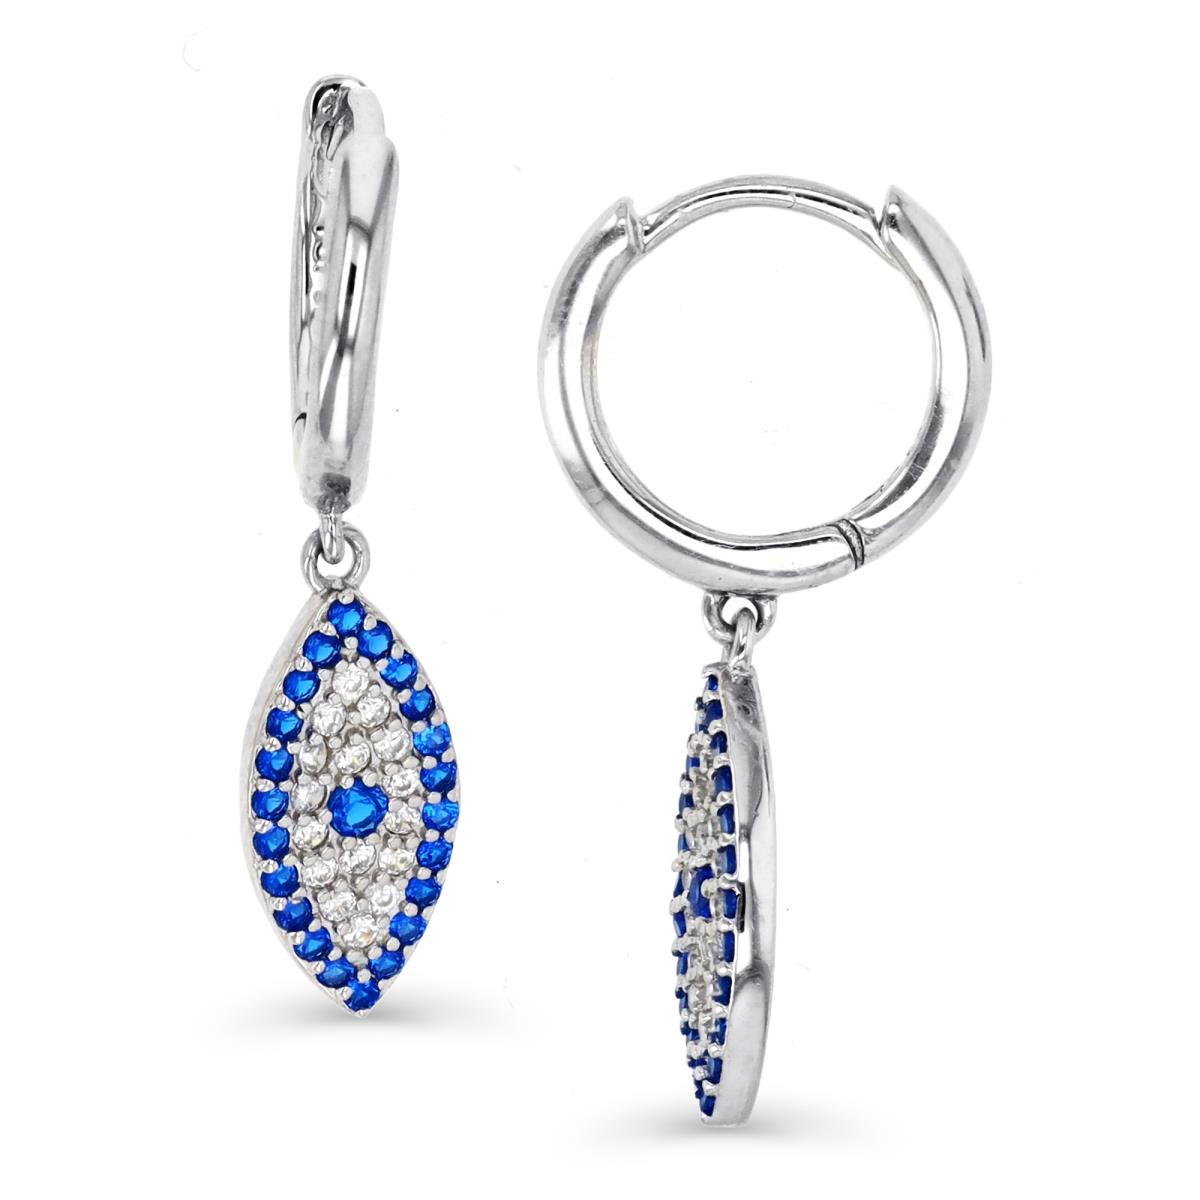 Sterling Silver Rhodium & #113 Blue and White CZ Evil Eye Dangling Huggie Earring